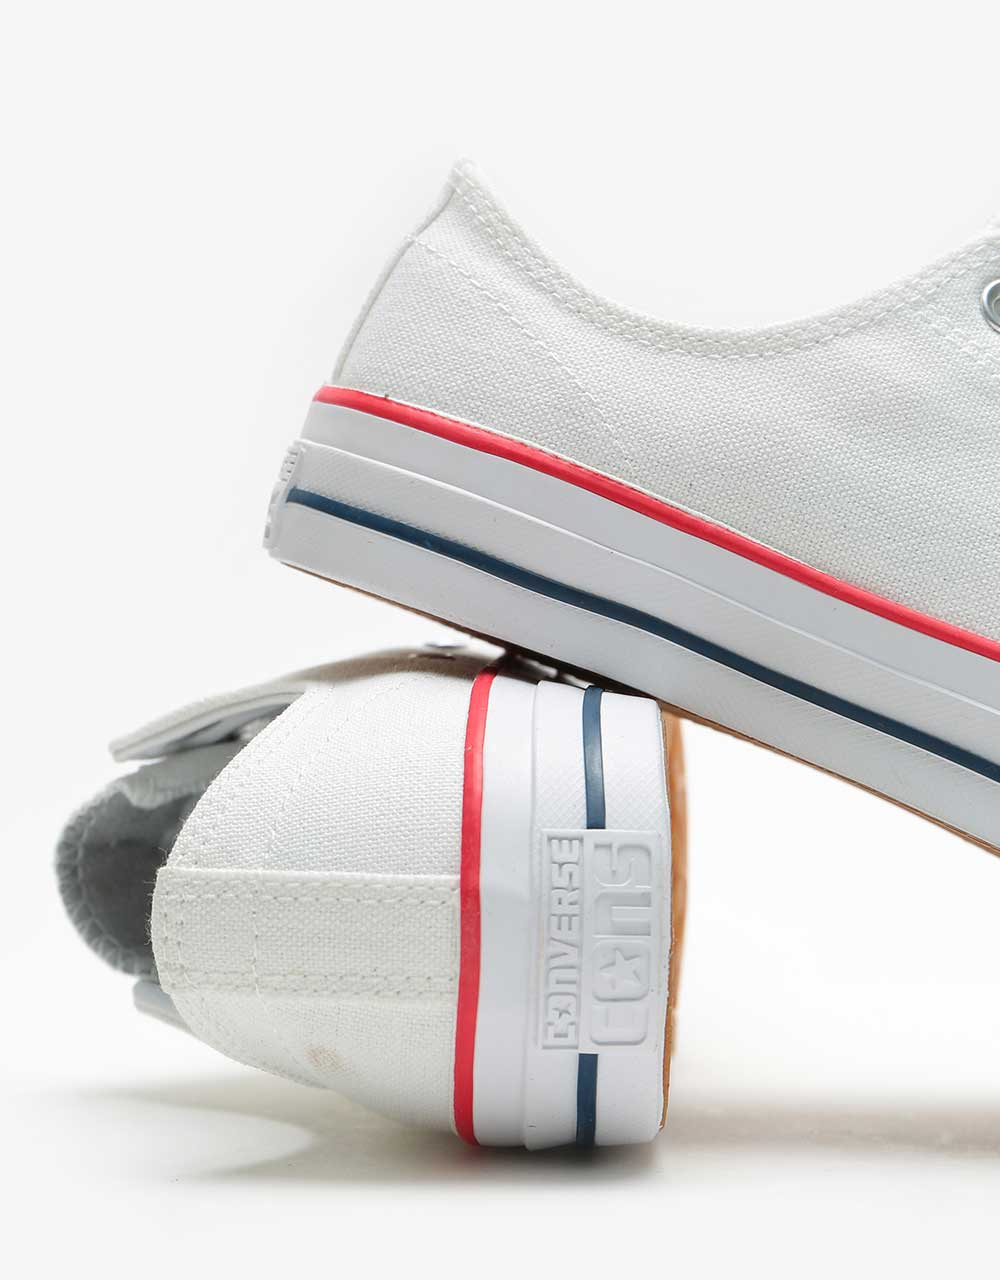 Converse CTAS Pro Ox Skate Shoes - White/Red/Insignia Blue